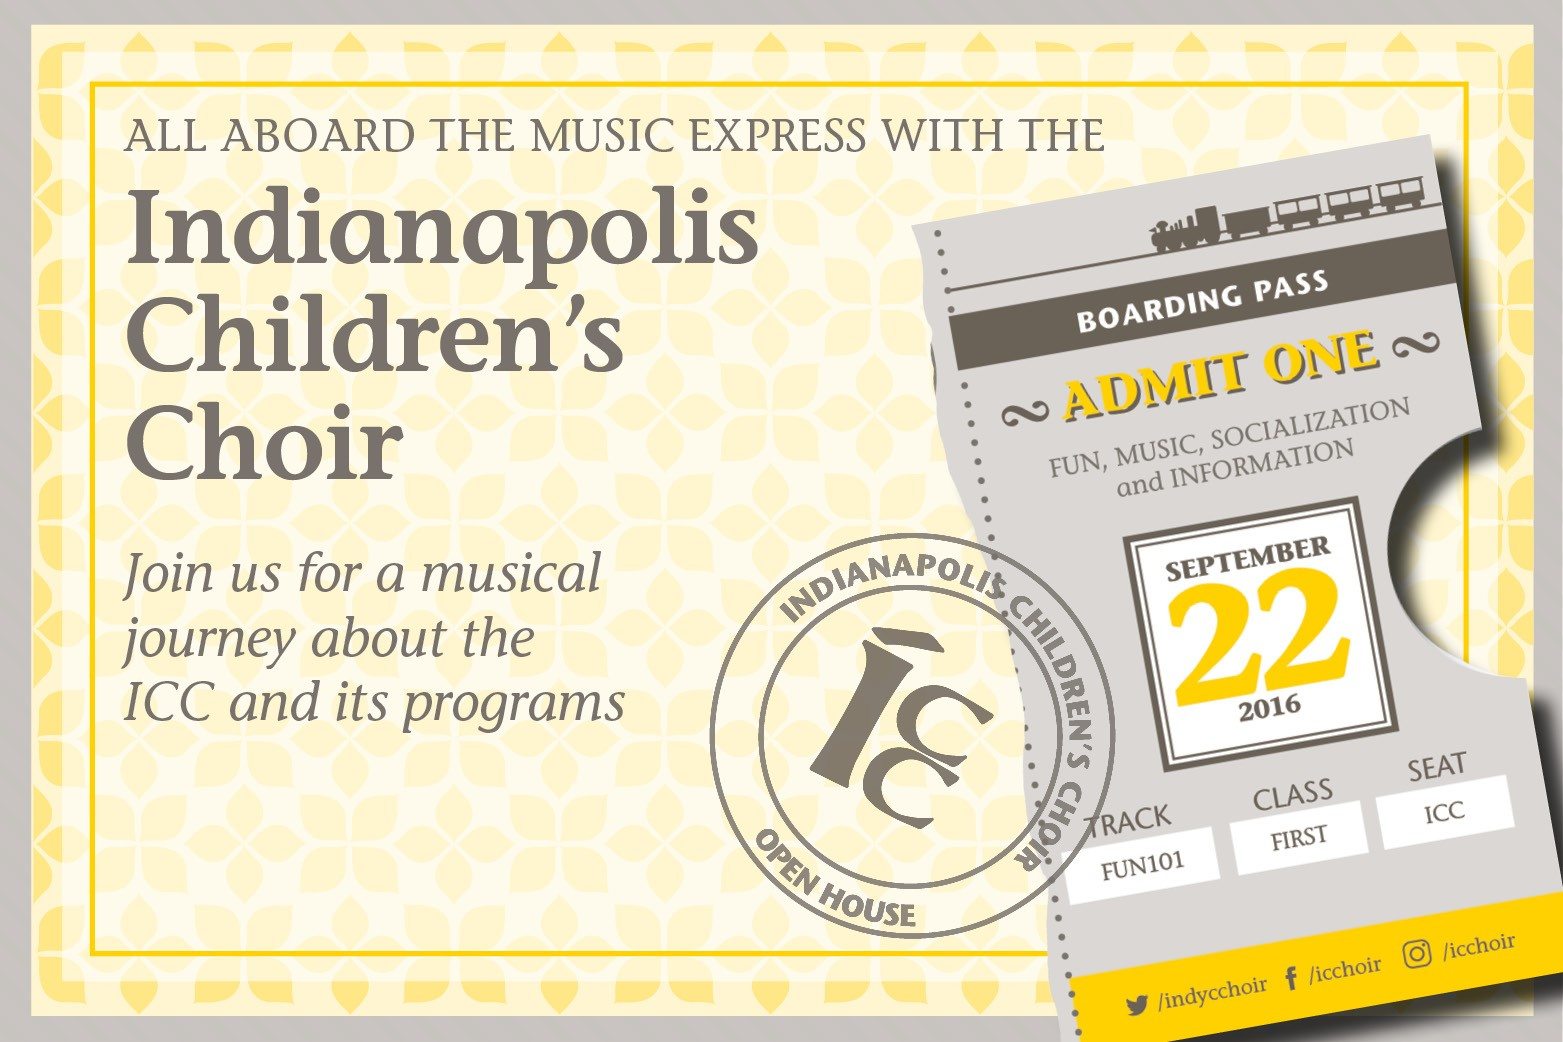 All aboard the Music Express! With The Indianapolis Children's Choir